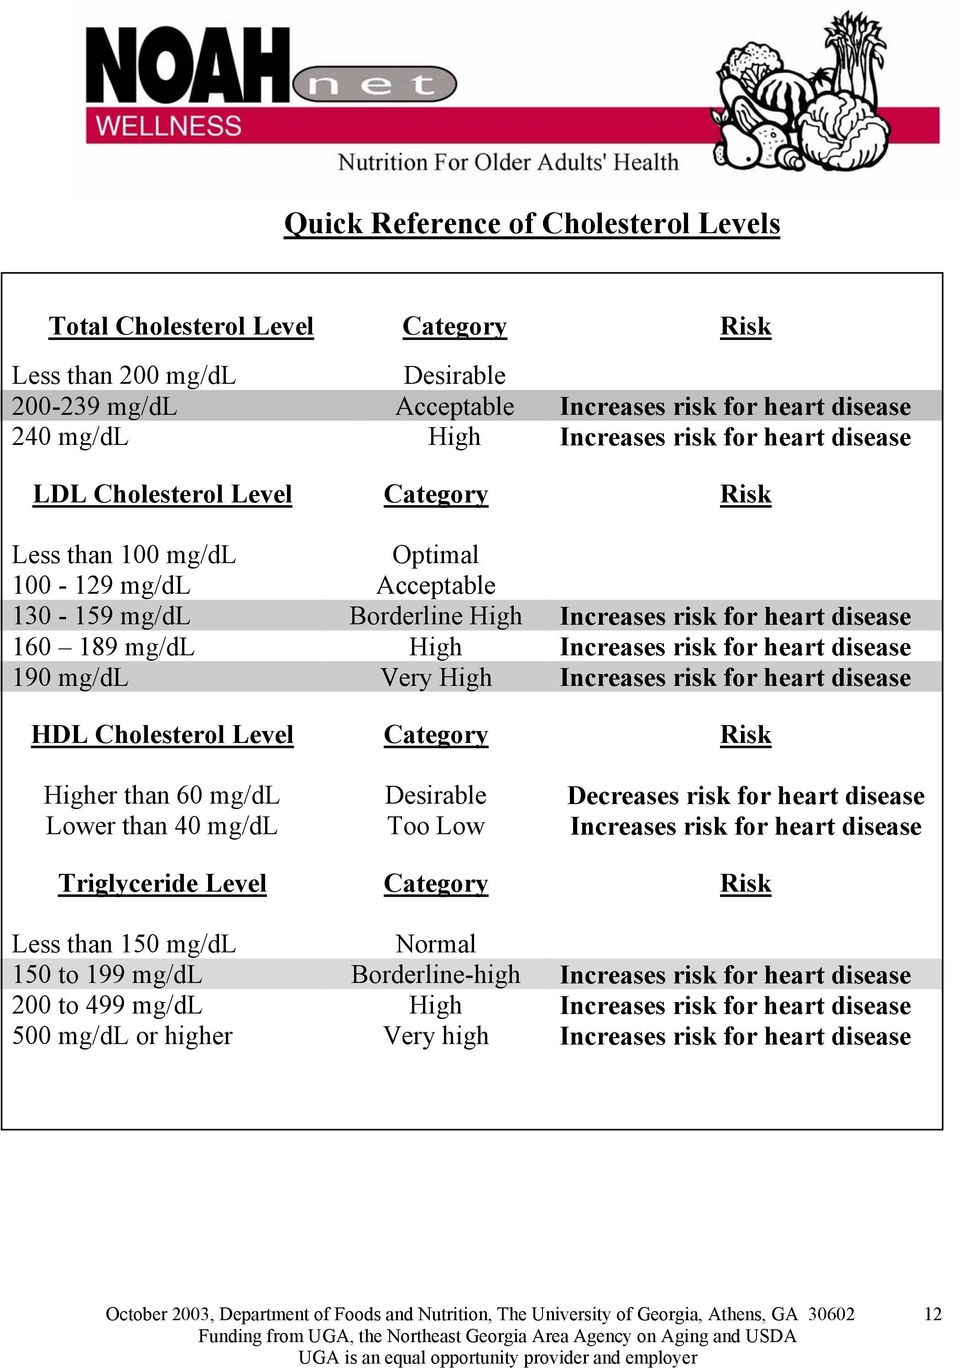 for heart disease 190 mg/dl Very High Increases risk for heart disease HDL Cholesterol Level Category Risk Higher than 60 mg/dl Desirable Decreases risk for heart disease Lower than 40 mg/dl Too Low